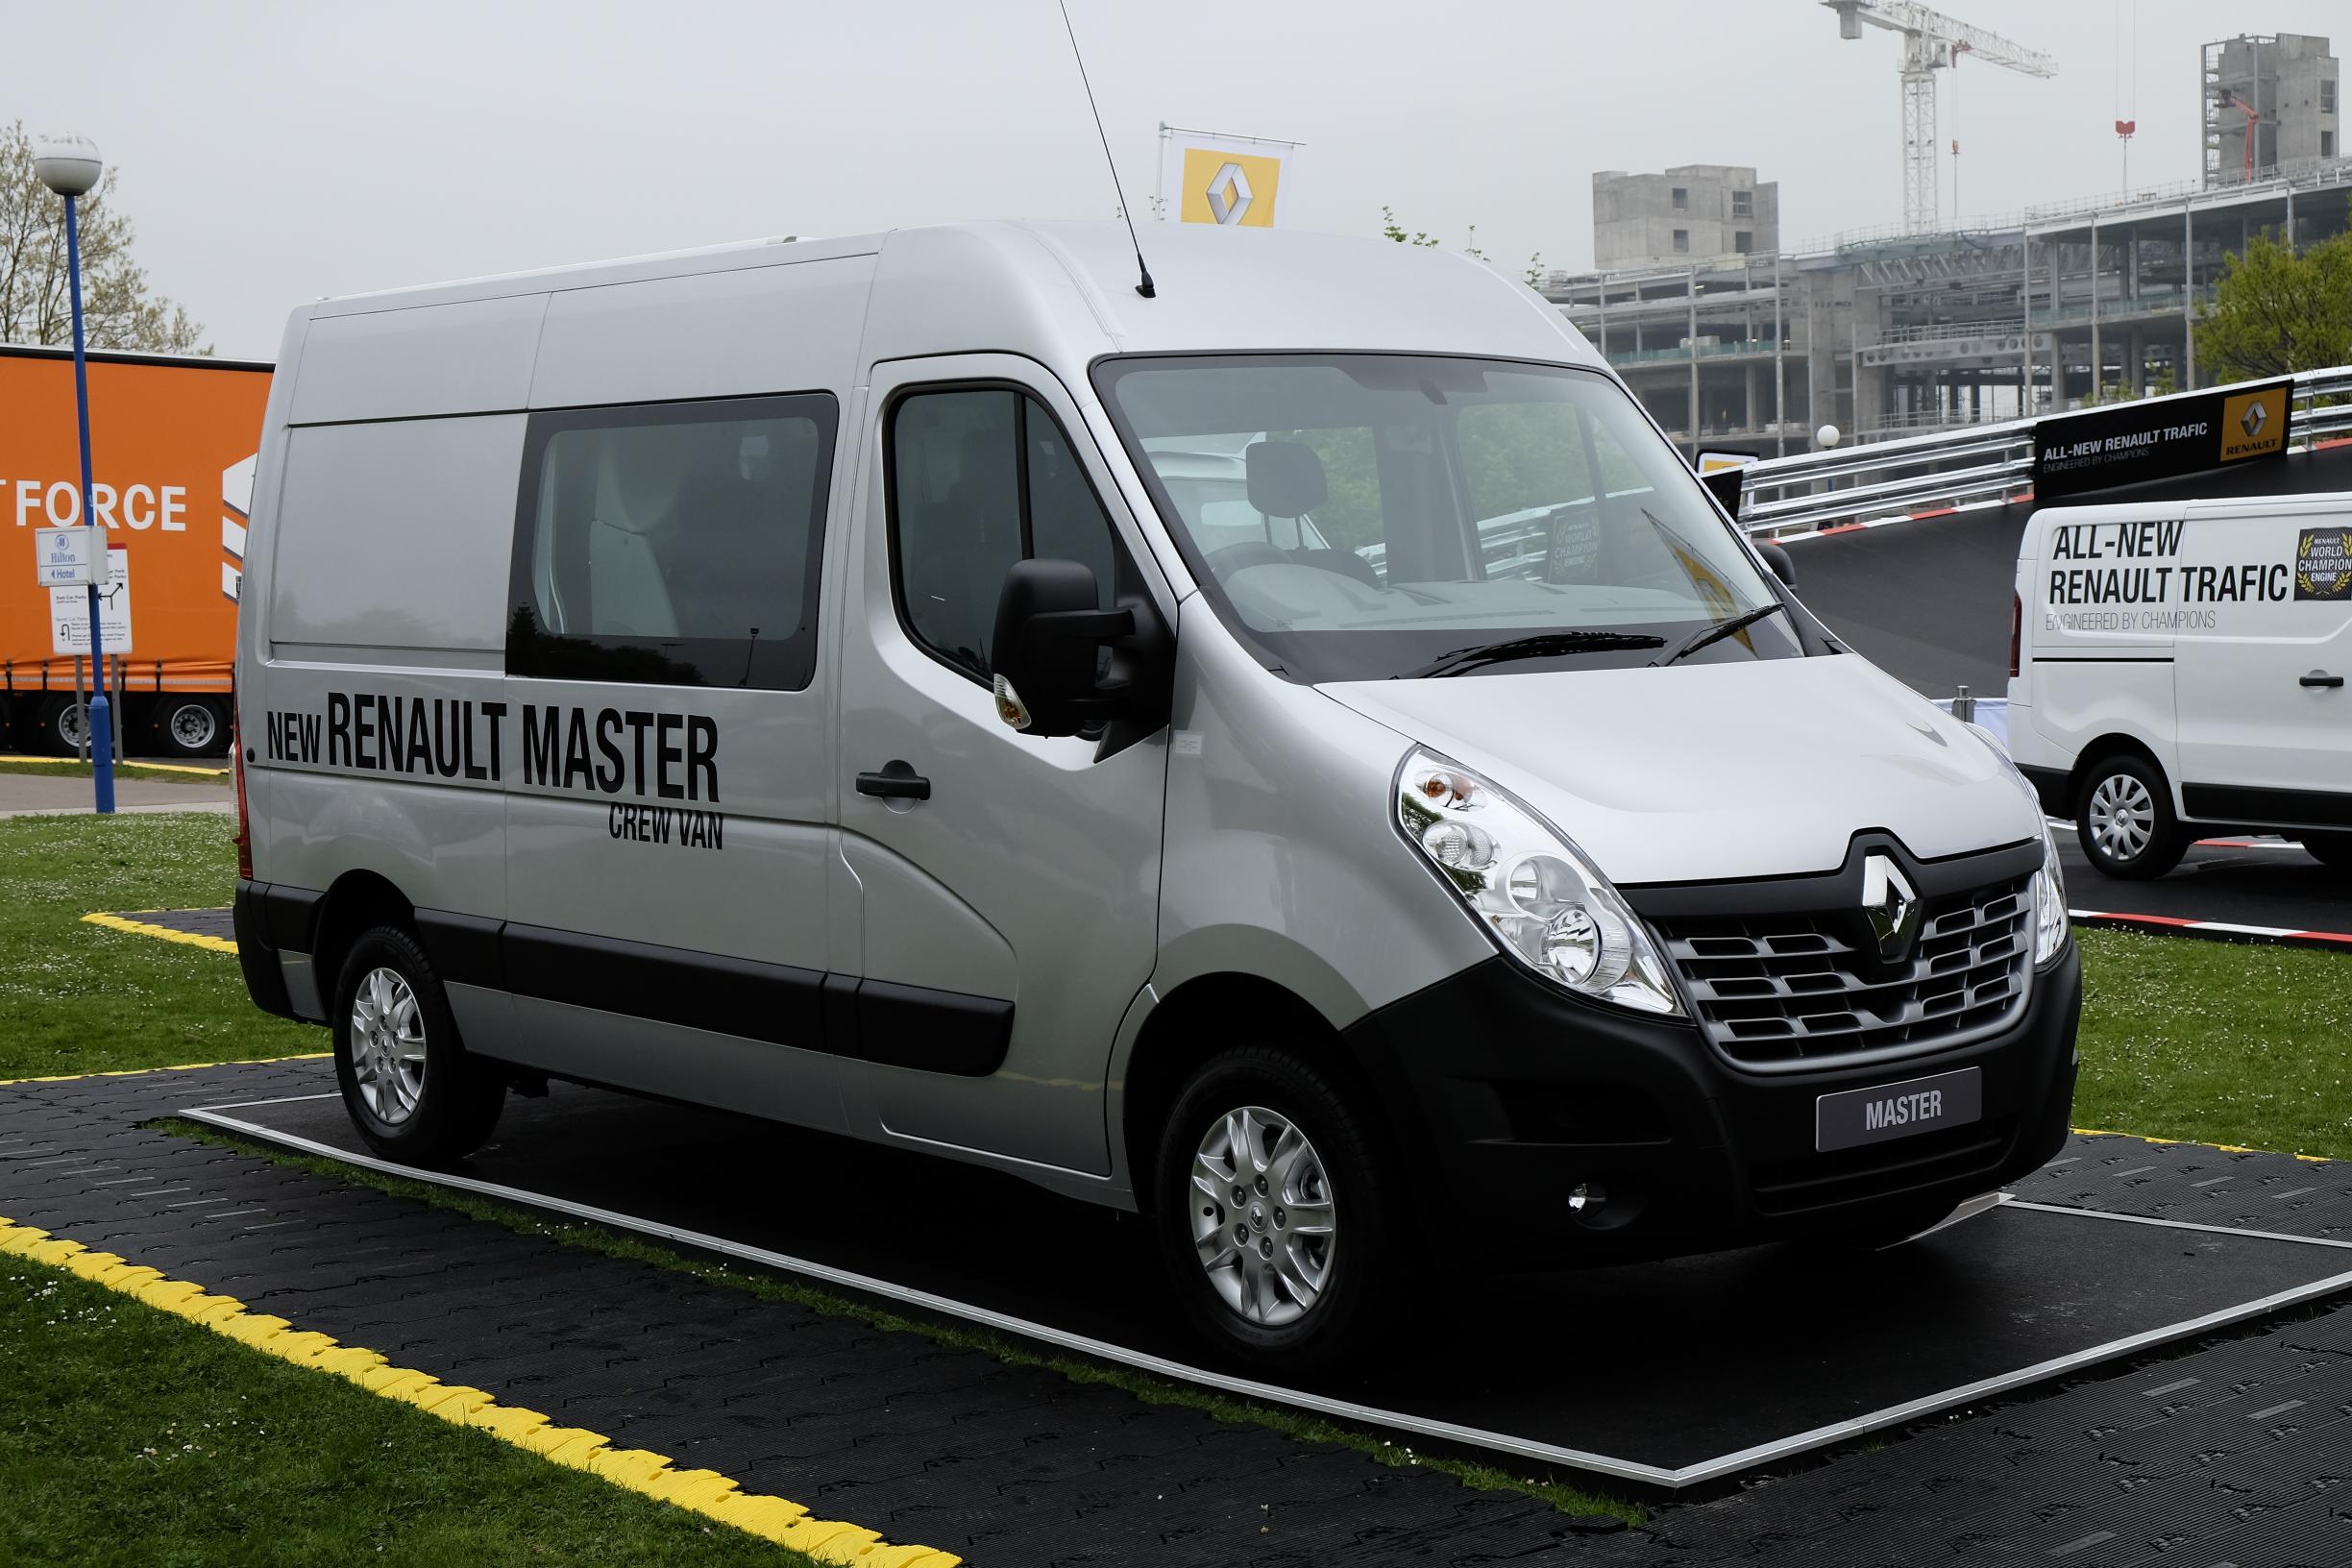 Renault master dual cab for sale